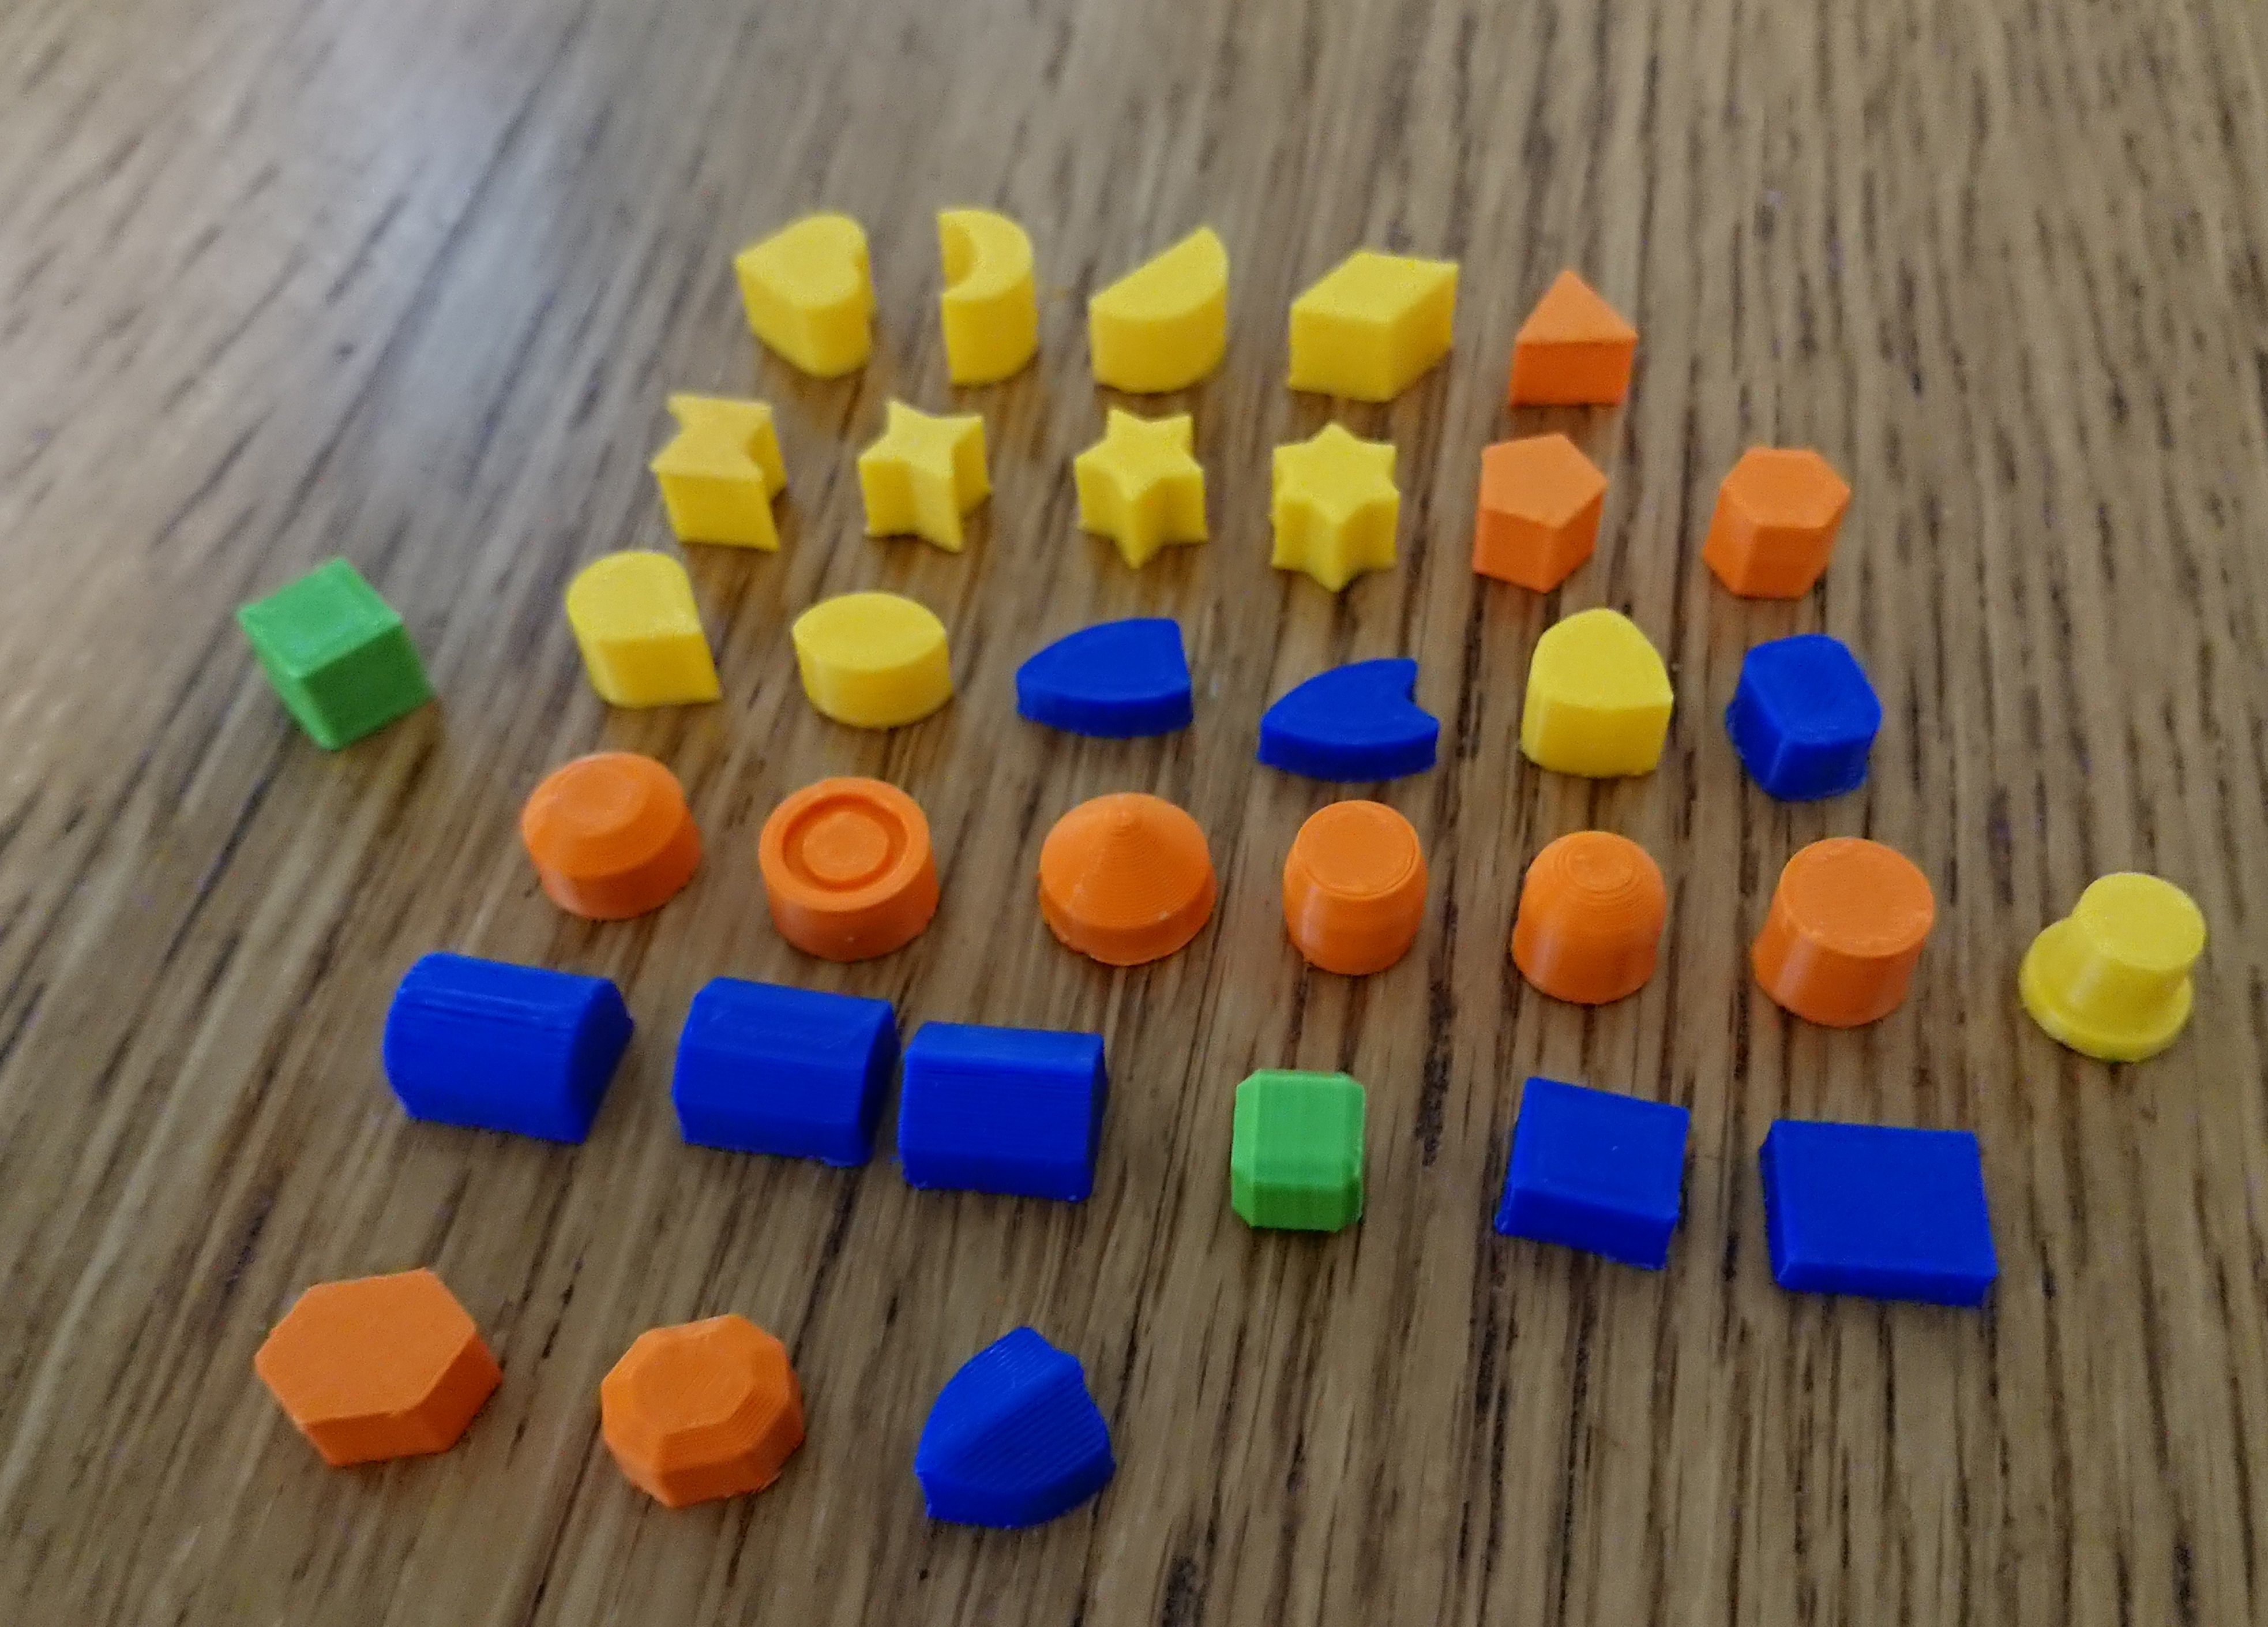 Cube replacement models for board games